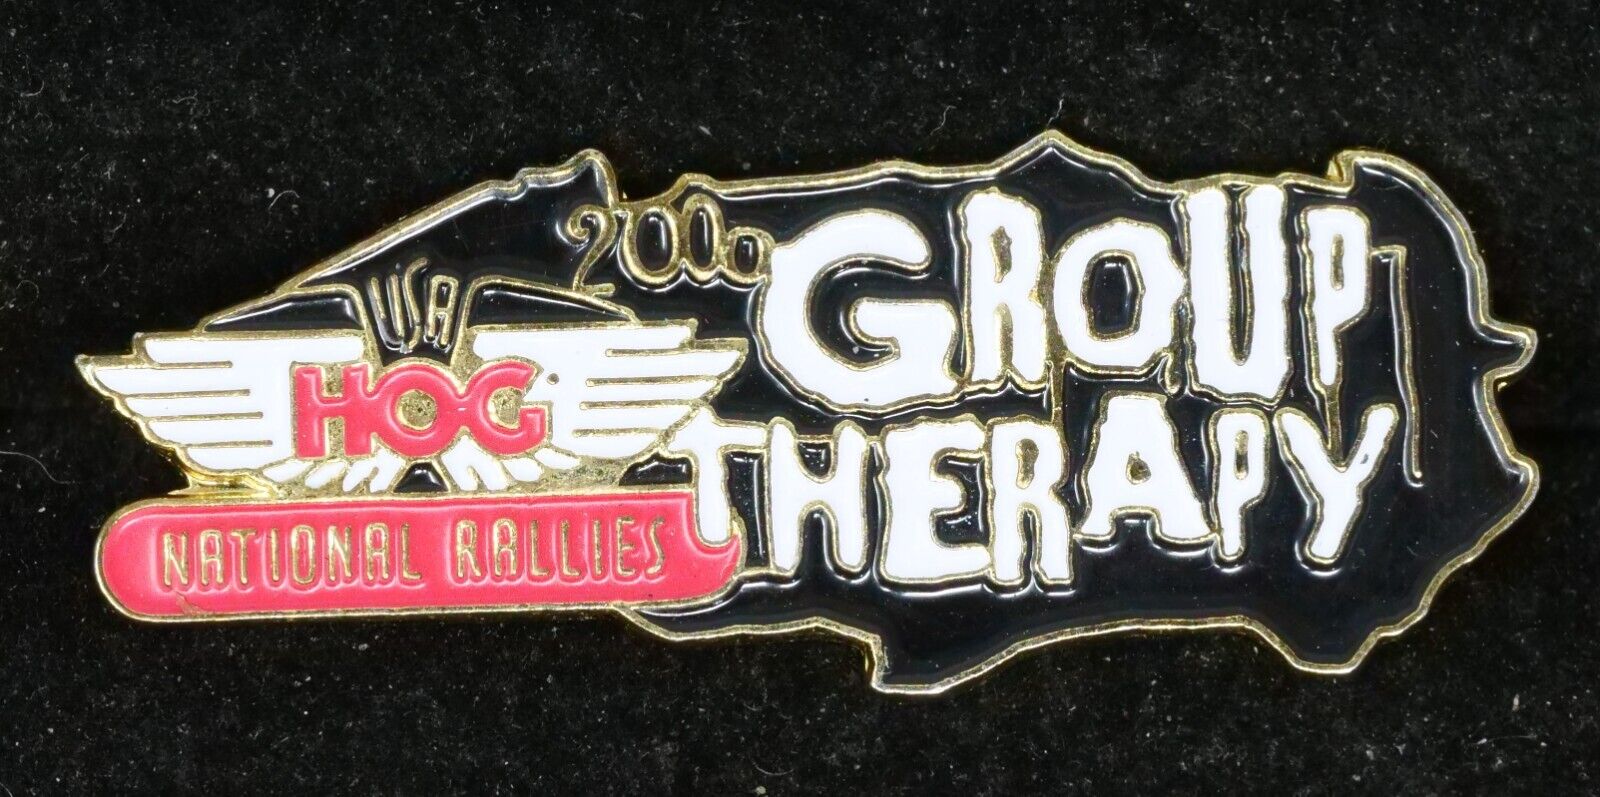 Harley Davidson Owners Group HOG 2000 Group Therapy Pin + Backings